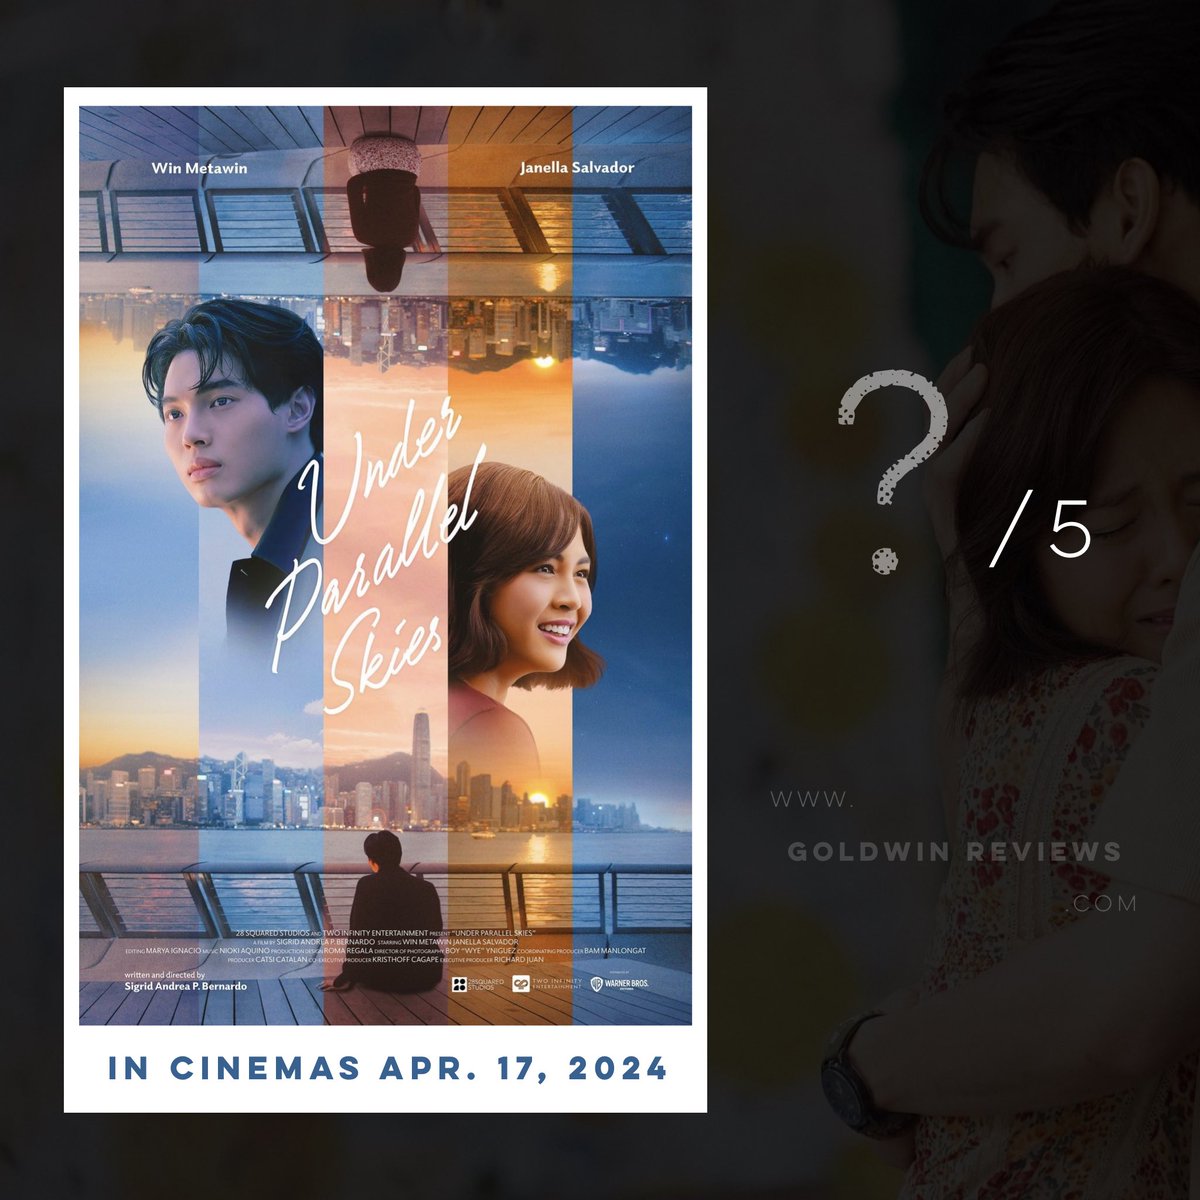 Full Movie Review will be released TODAY 7:30pm at goldwinreviews.com.

In the meantime, can you guess what’s the rating?

VOTE BELOW or go to this post then comment your rating: goldwinreviews.com/post/under-par…

#UnderParallelSkies #JanellaSalvador #WinMetawin #WinElla